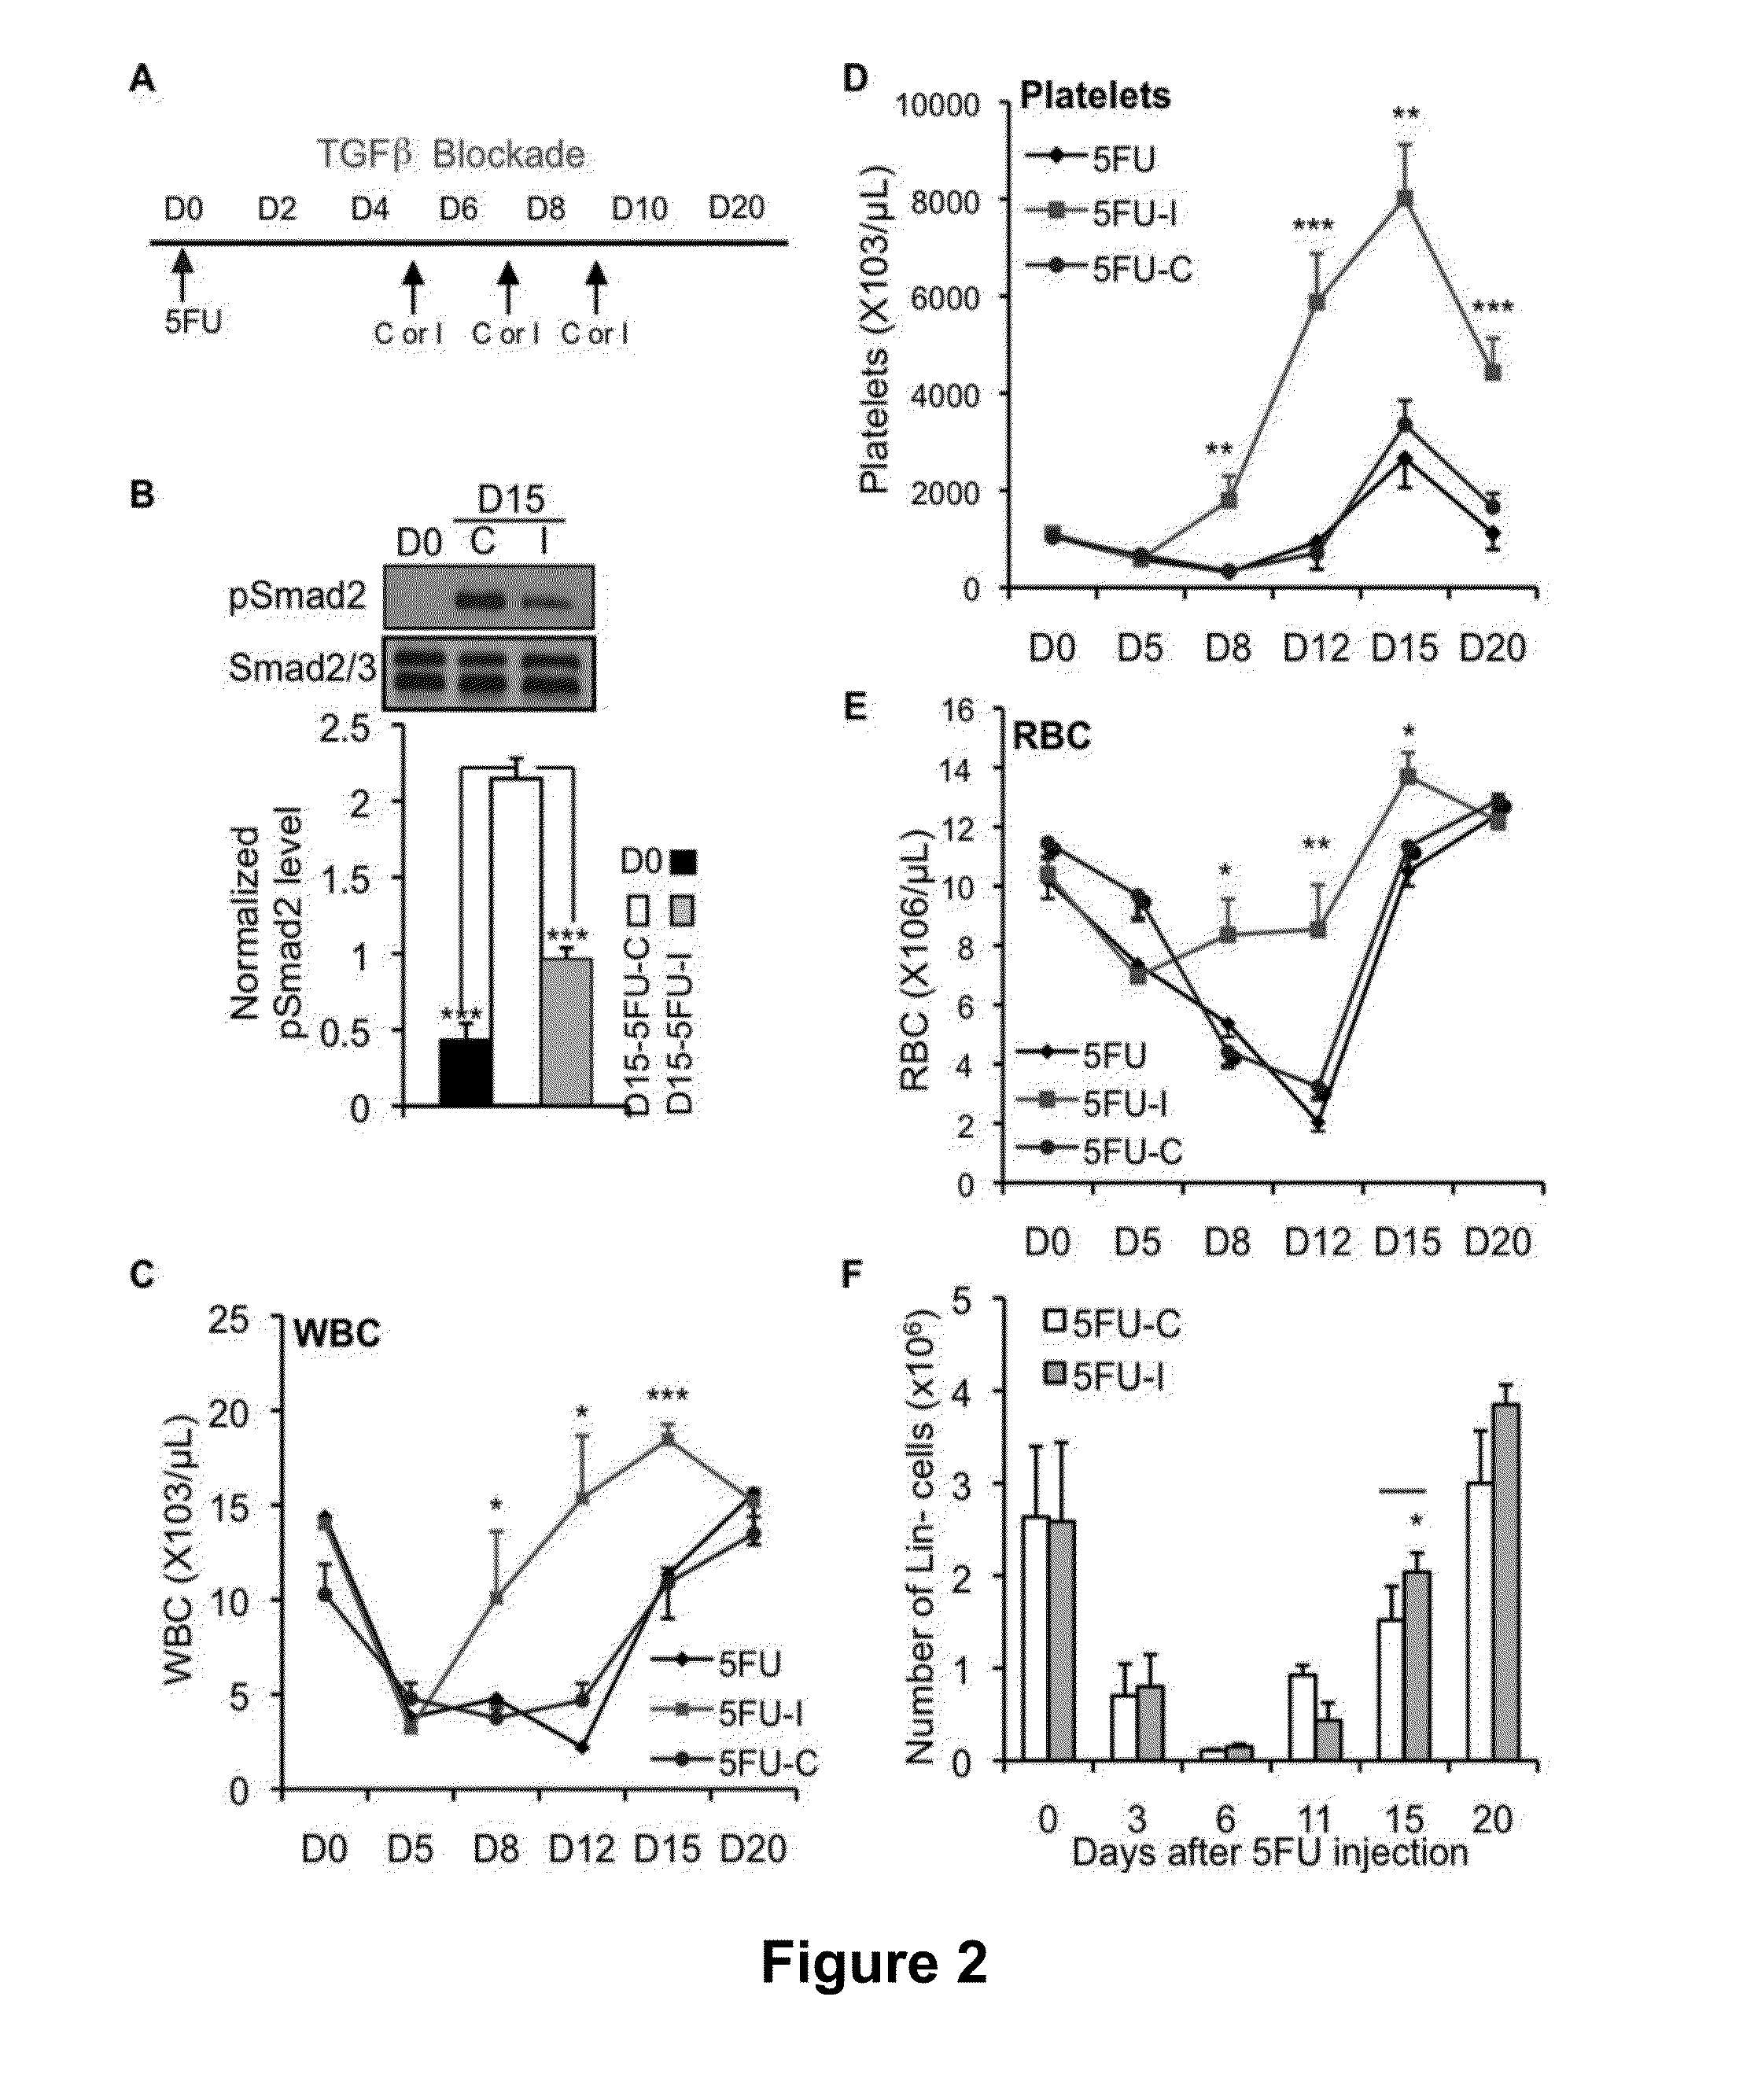 Methods for stimulating hematopoietic recovery by inhibiting TGF beta signaling